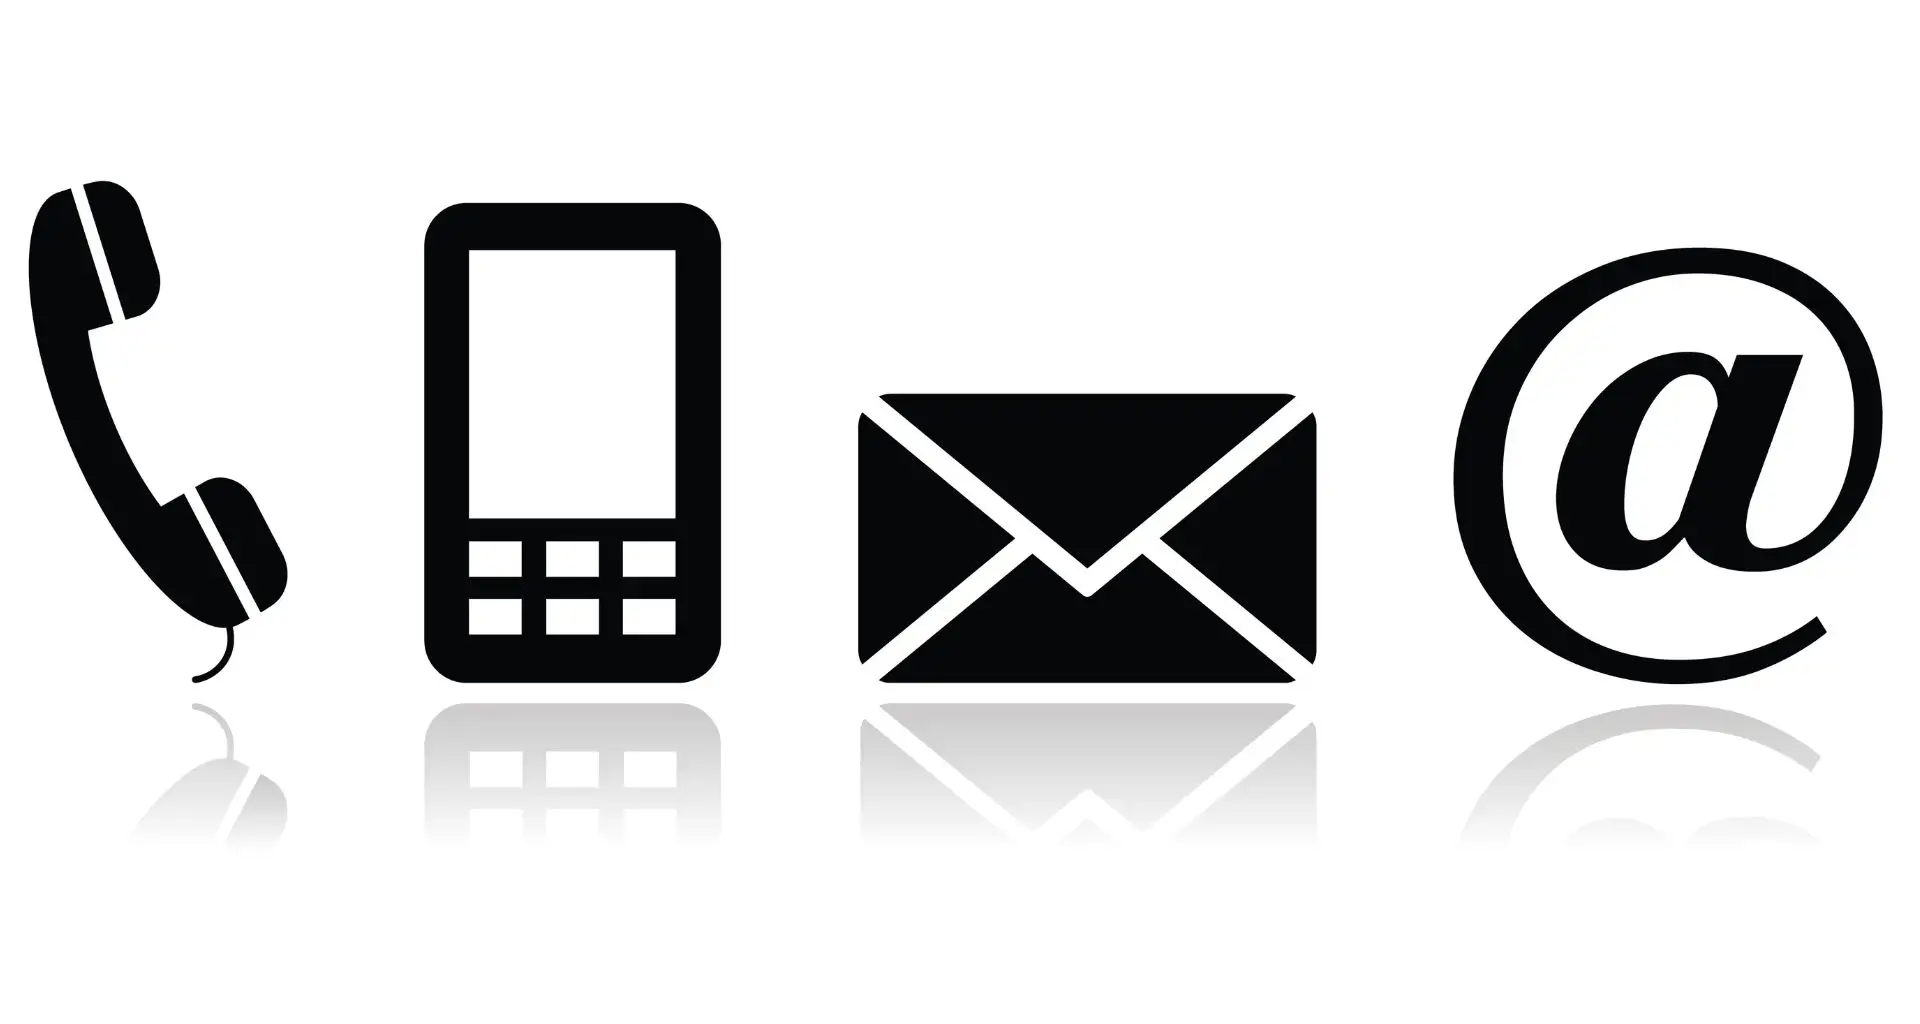 Contact icons including a telephone, smartphone, mail envelope, and '@' symbol representing the various ways to contact a clinic in Victoria, Australia, for hair drug, alcohol, and steroid testing services.